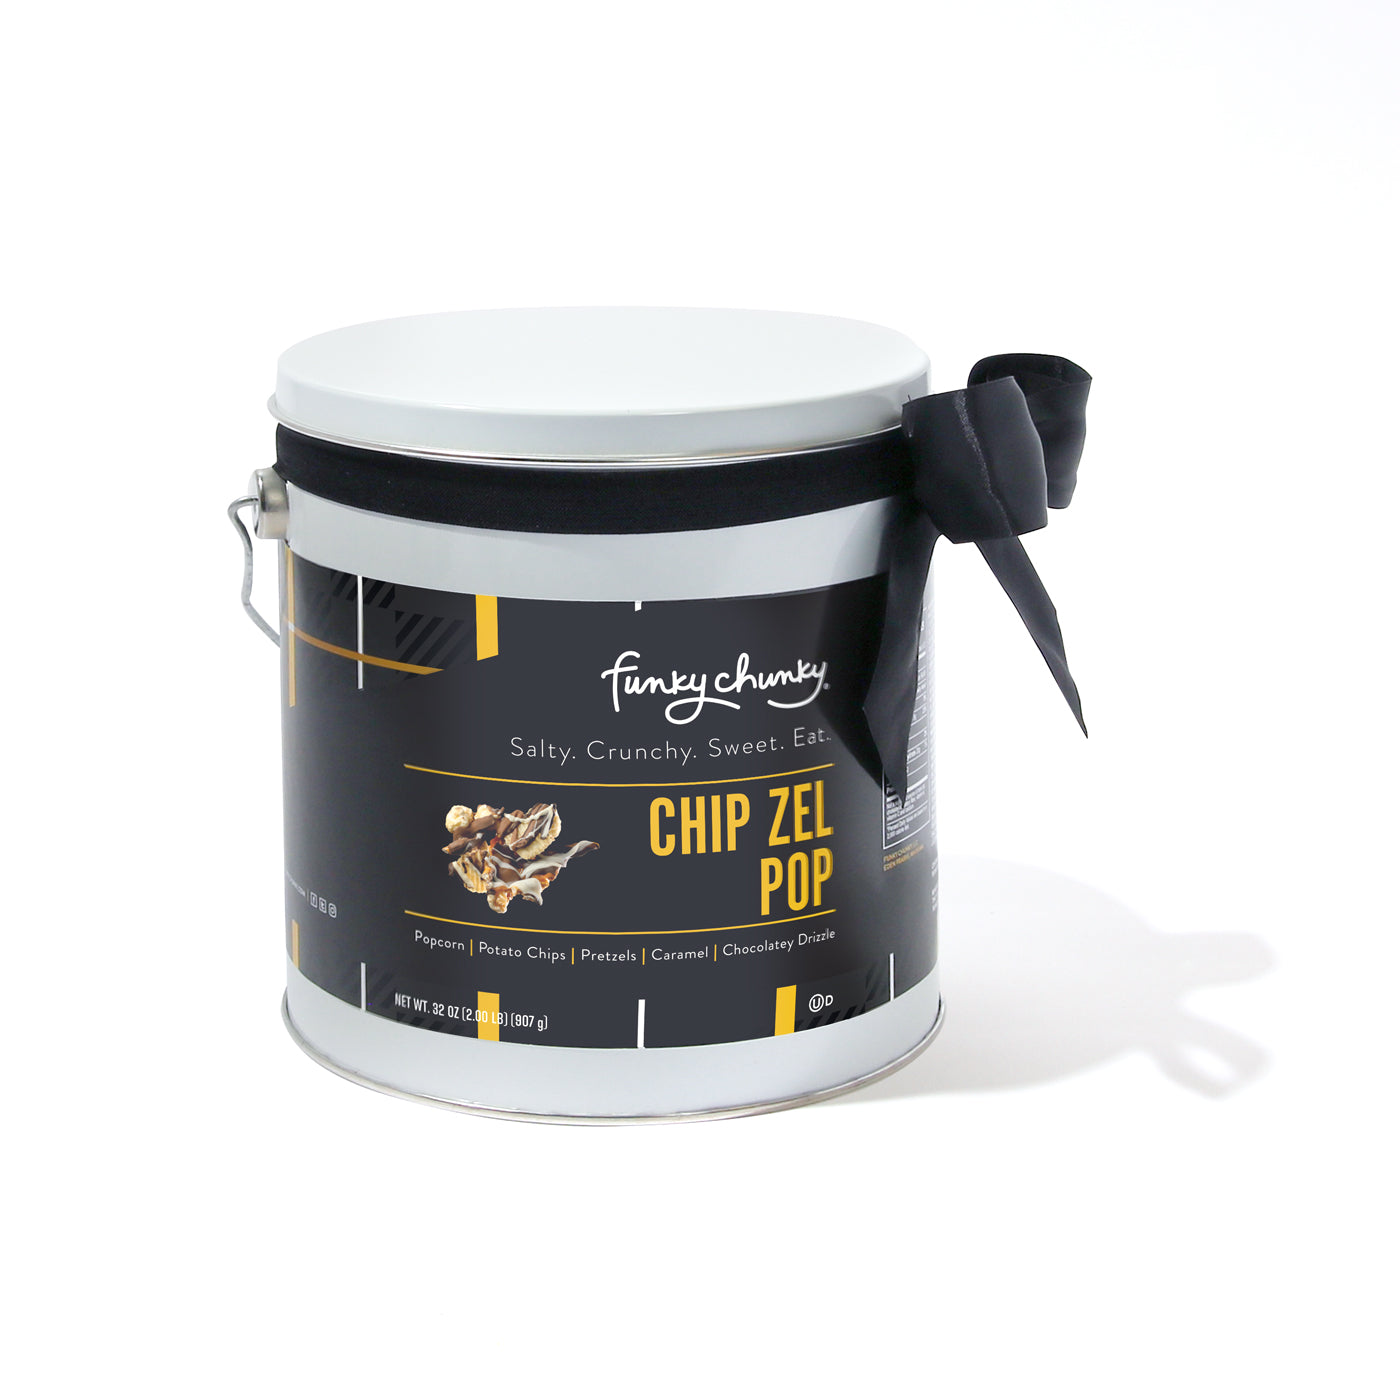 Chip Zel Pop Gift Pail 2 lb-All your cravings satisfied in one bite! Sweet and salty, chewy, crispy and crunchy, Chip Zel Pop gourmet popcorn is an incredible marriage of flavors that will keep you wanting more. Made with crisp potato chips, pretzel sticks, and buttery caramel popcorn - mixed together and drizzled with thick caramel and dark, milk and white chocolatey goodness.-Funky Chunky